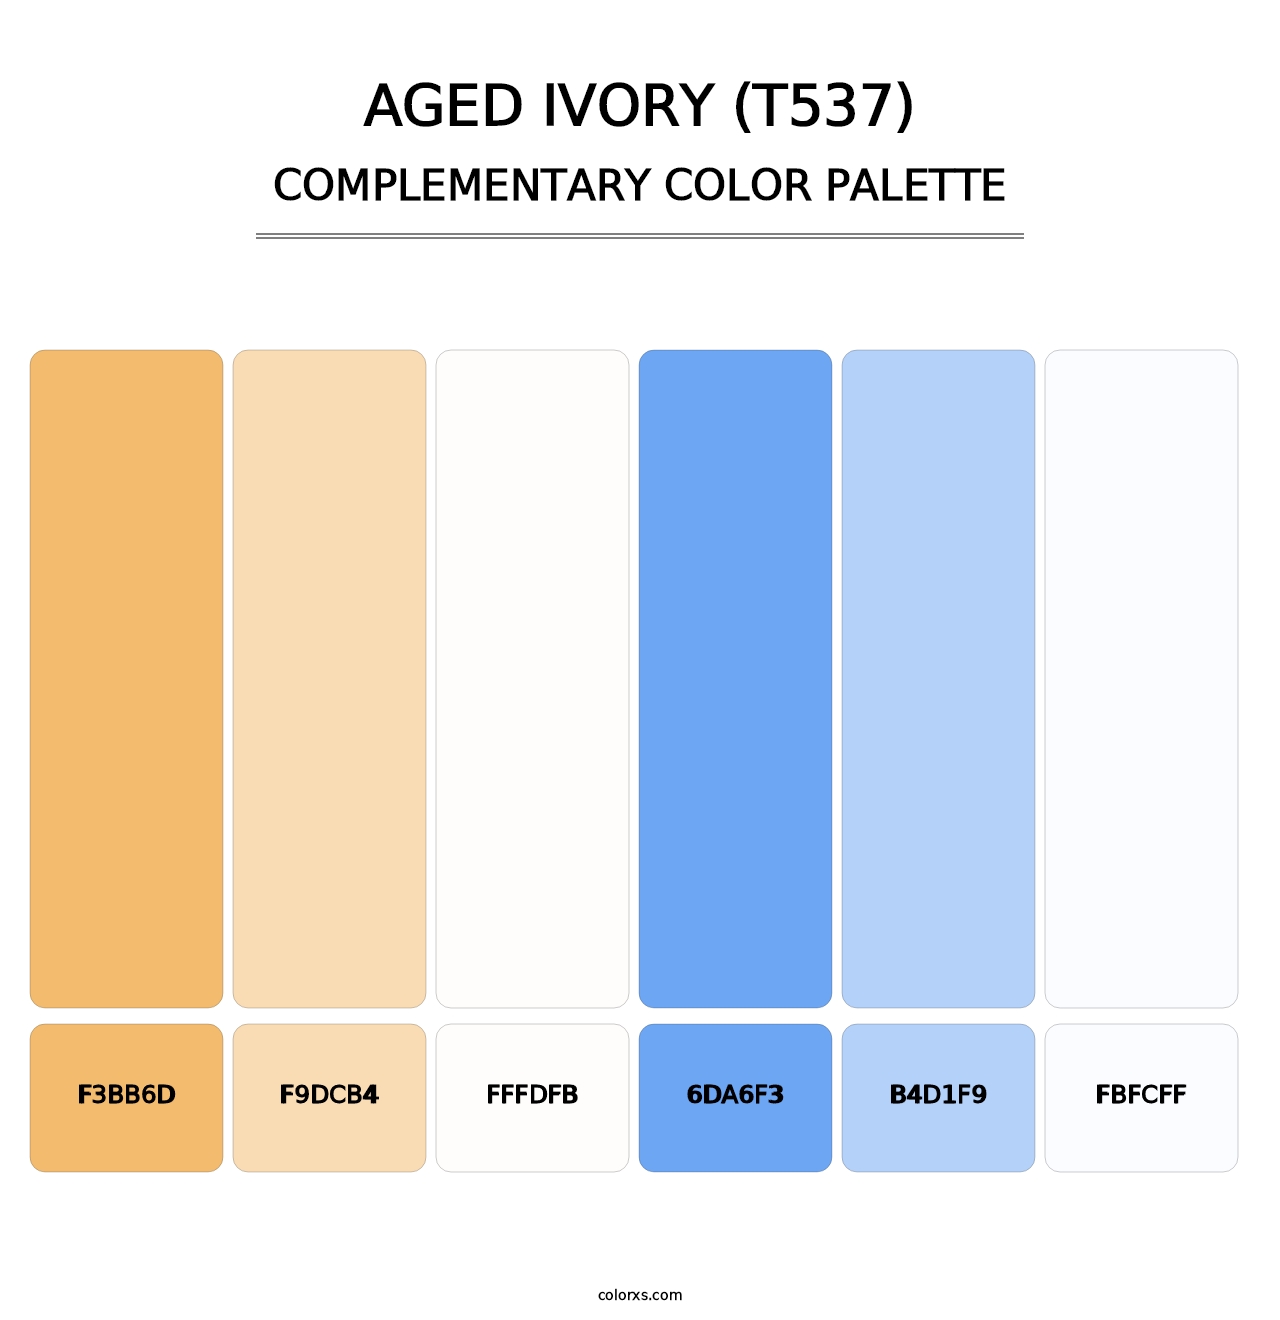 Aged Ivory (T537) - Complementary Color Palette